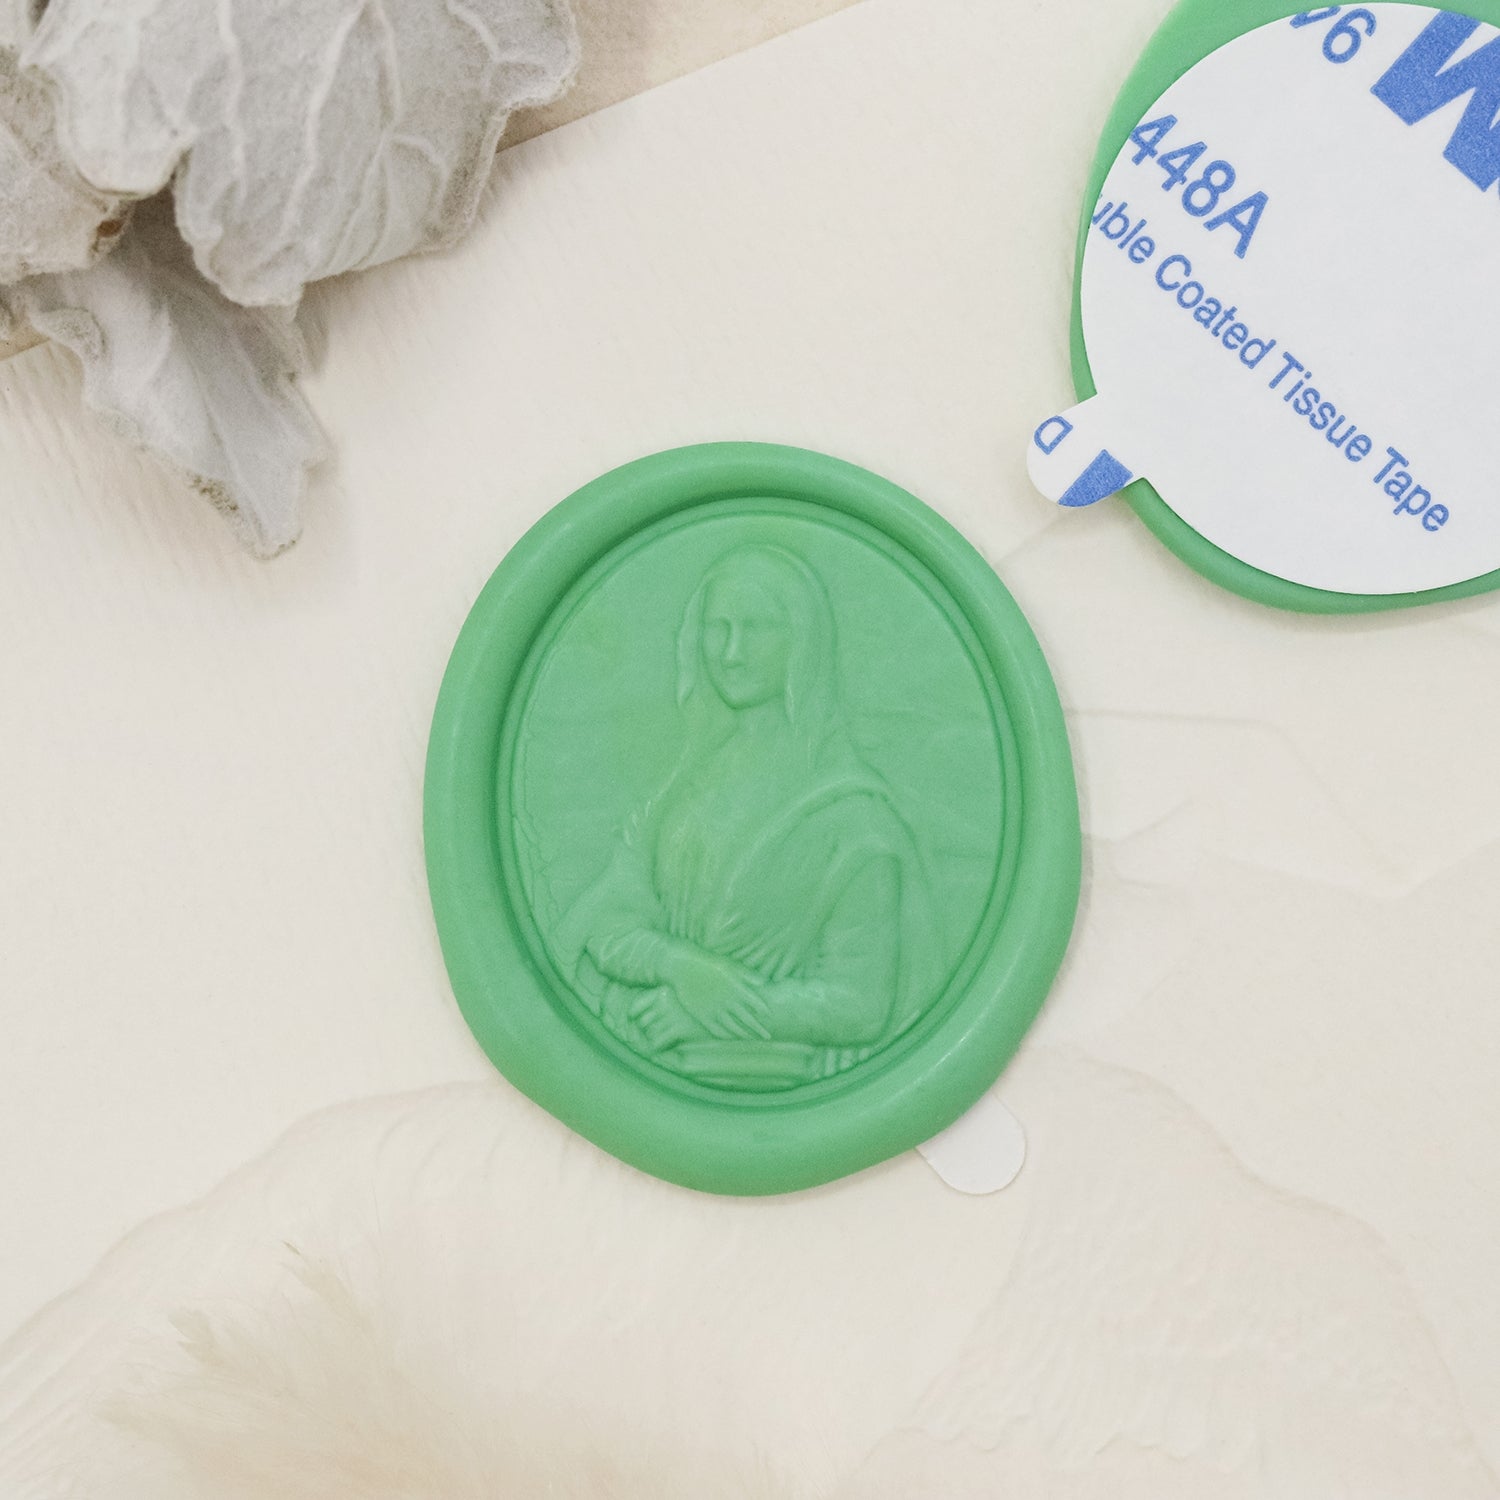 Stamprints 3D Relief Mona Lisa Self-adhesive Wax Seal Stickers 1